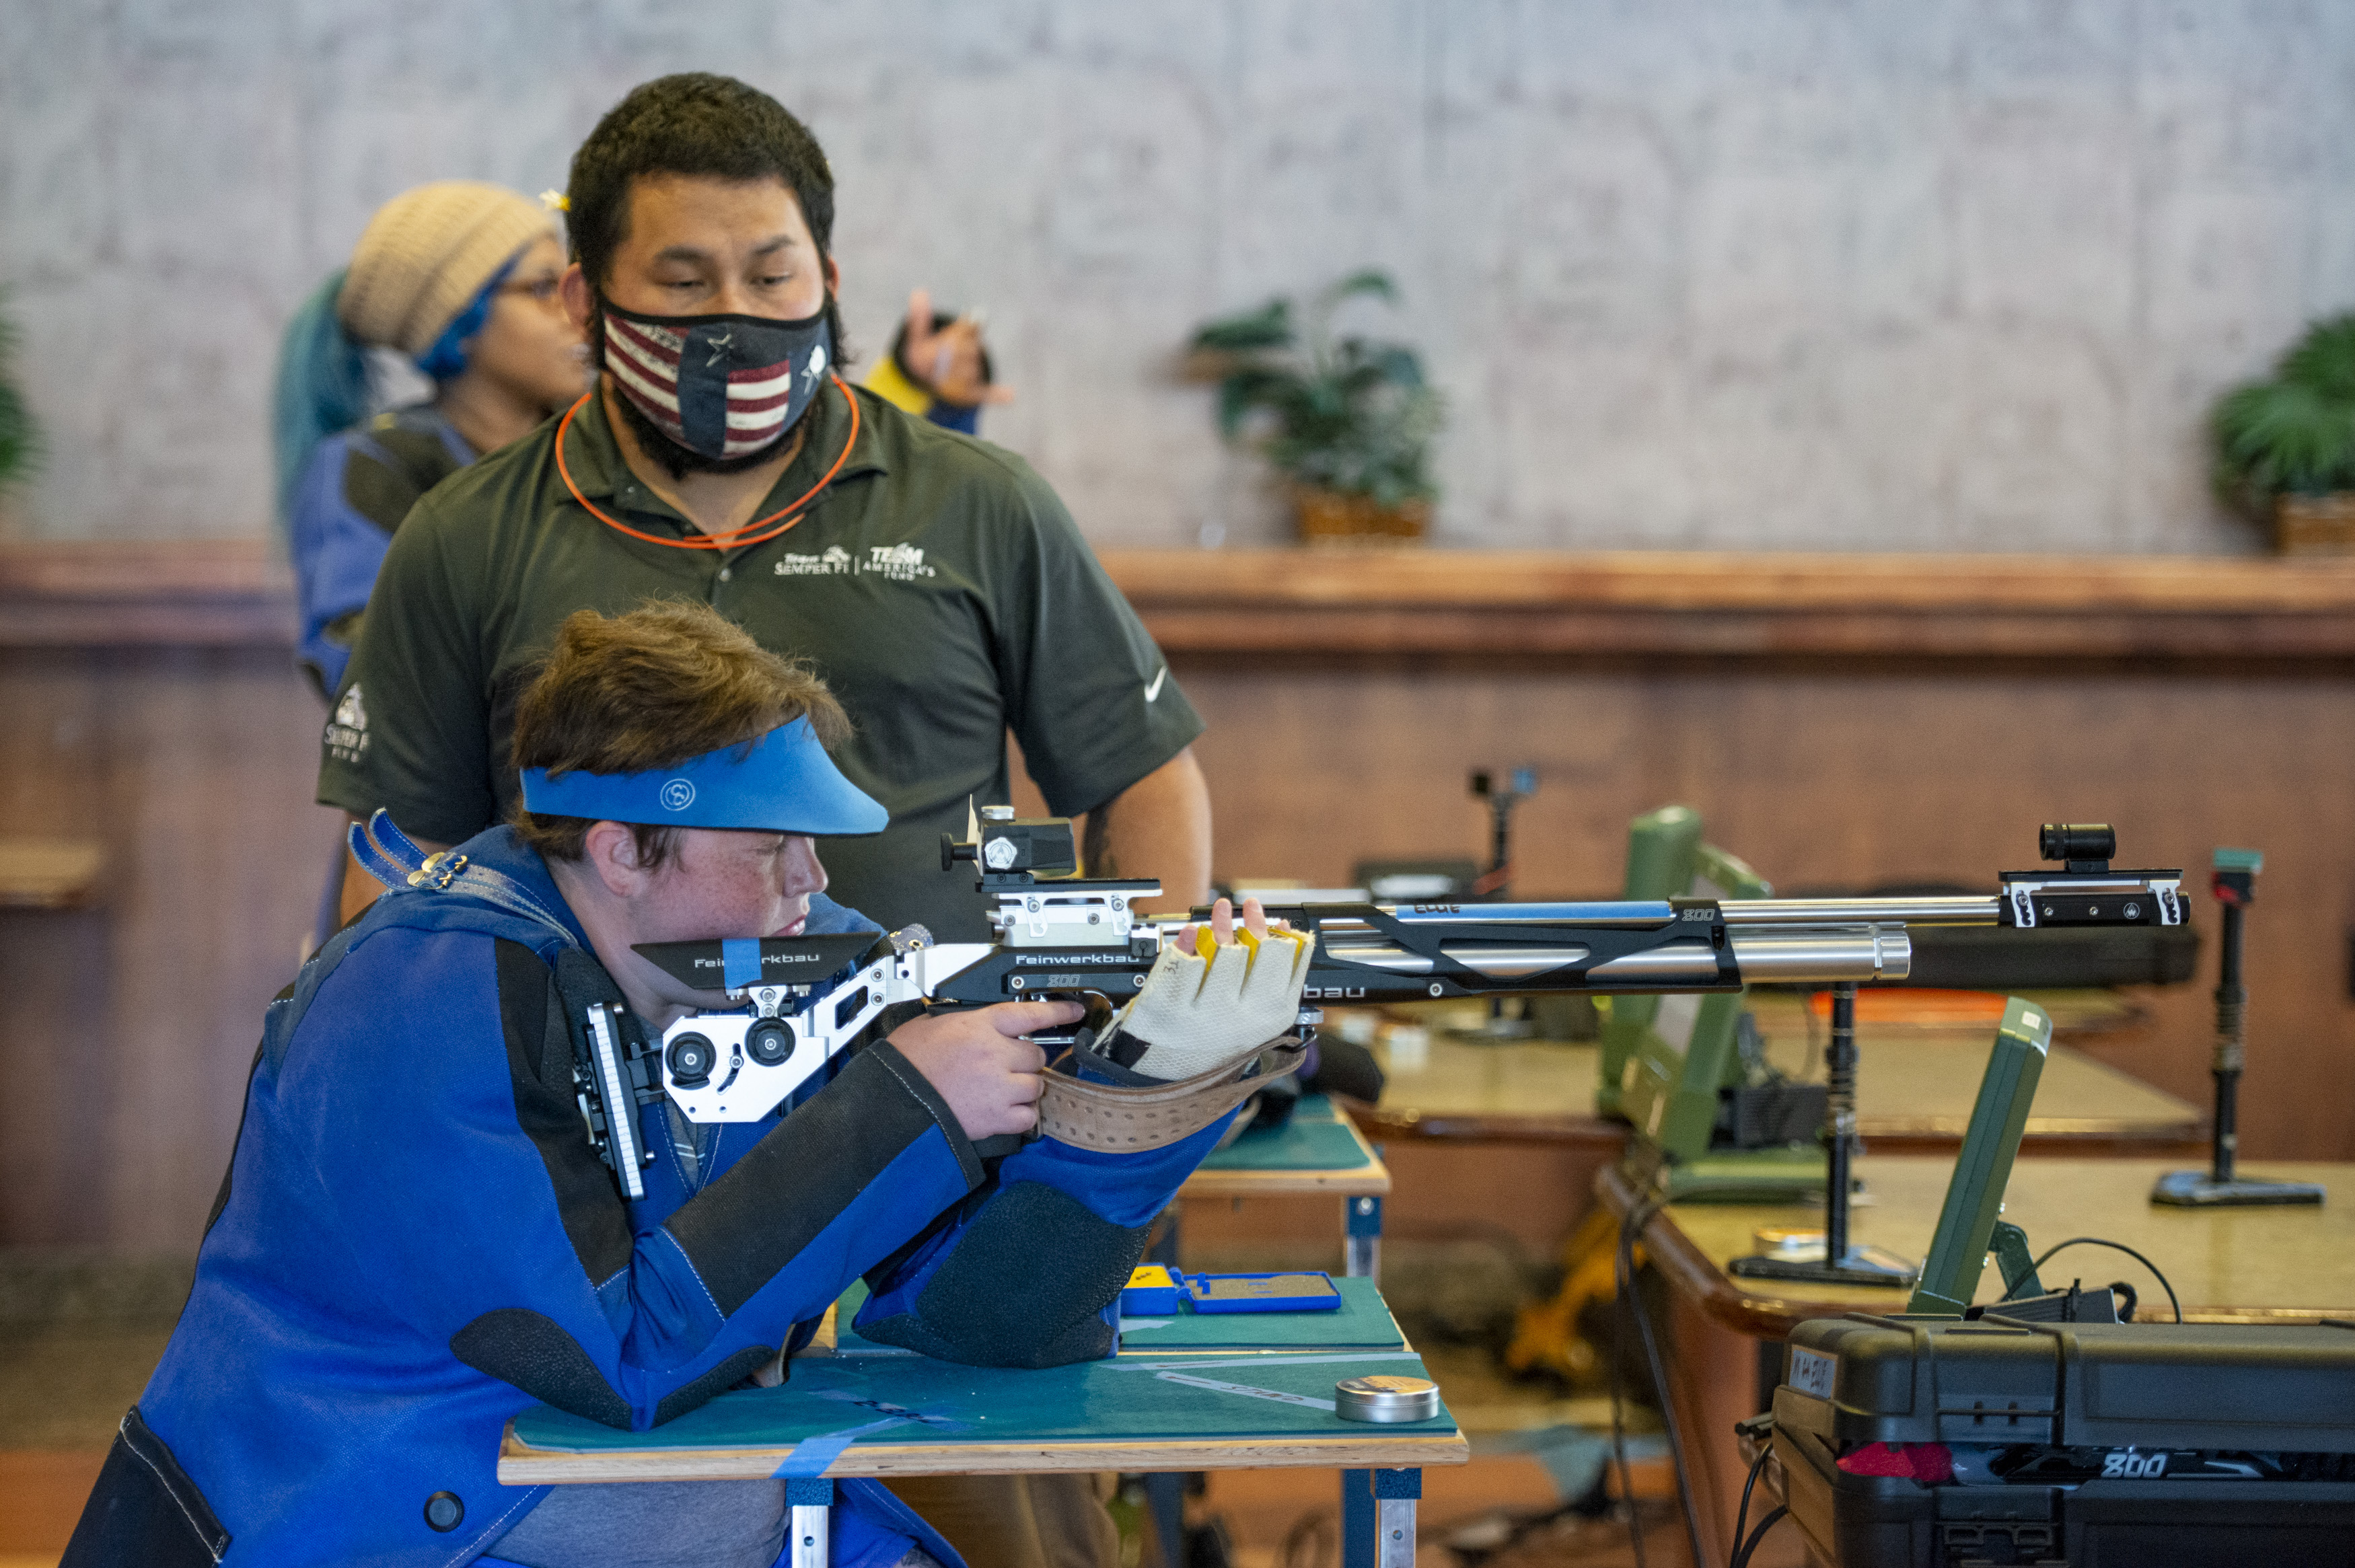 Coach Roel Espino assists Retired AZ3 Elizabeth “Ellie” Smith with air rifle during the Navy Warrior Games Training Camp at Port Hueneme - Naval Base Ventura County, California